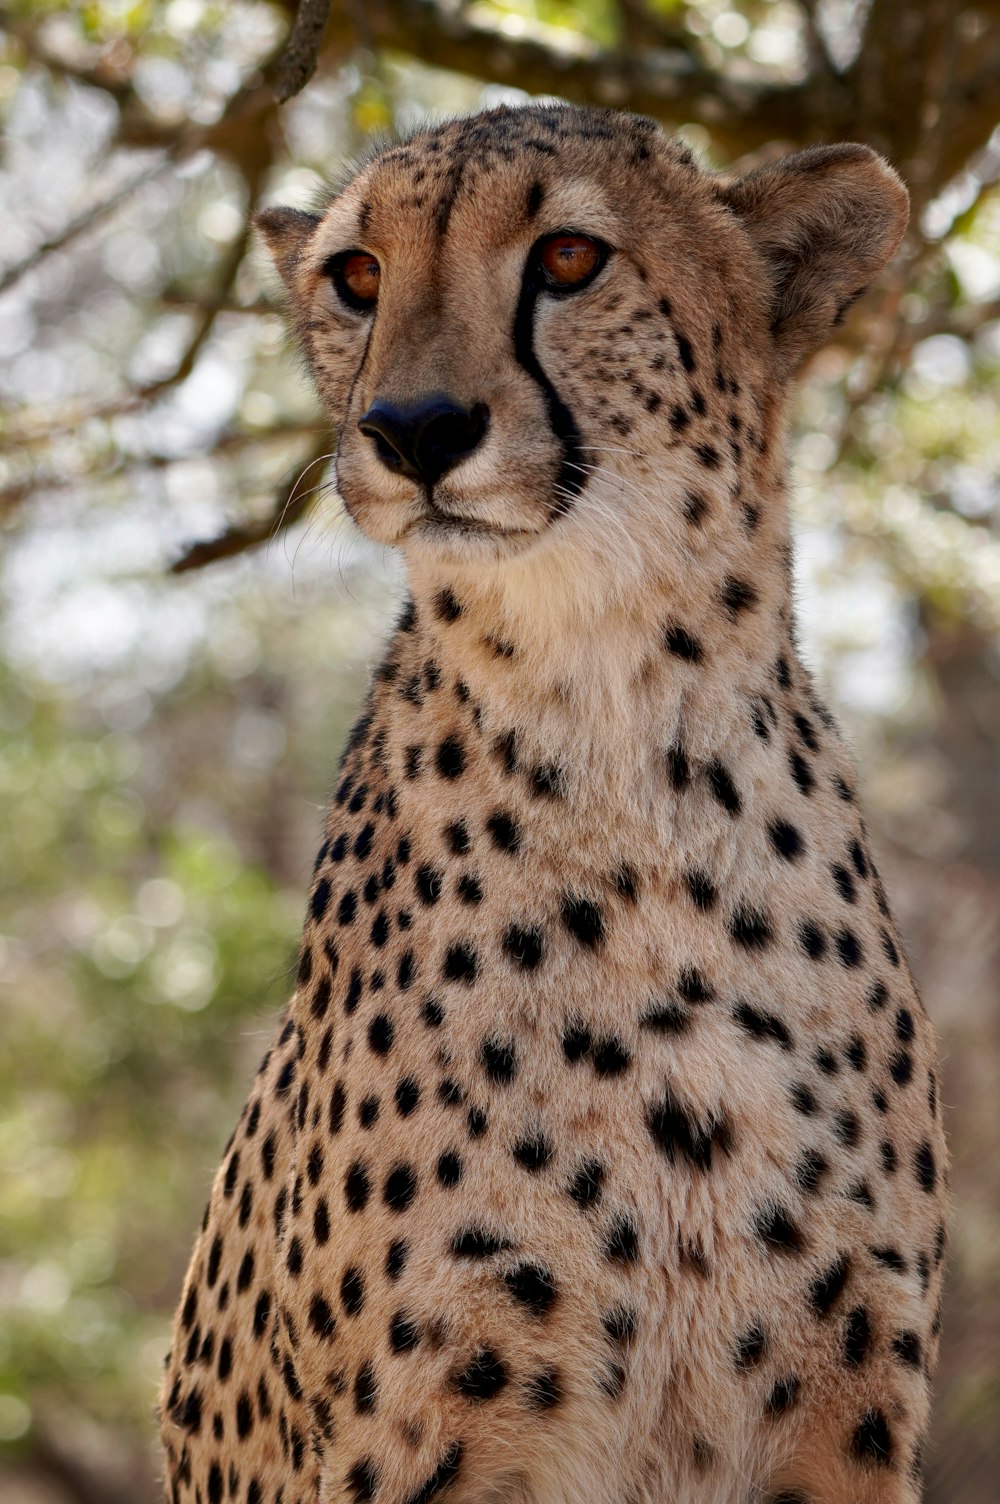 a close up of a cheetah sitting under a tree